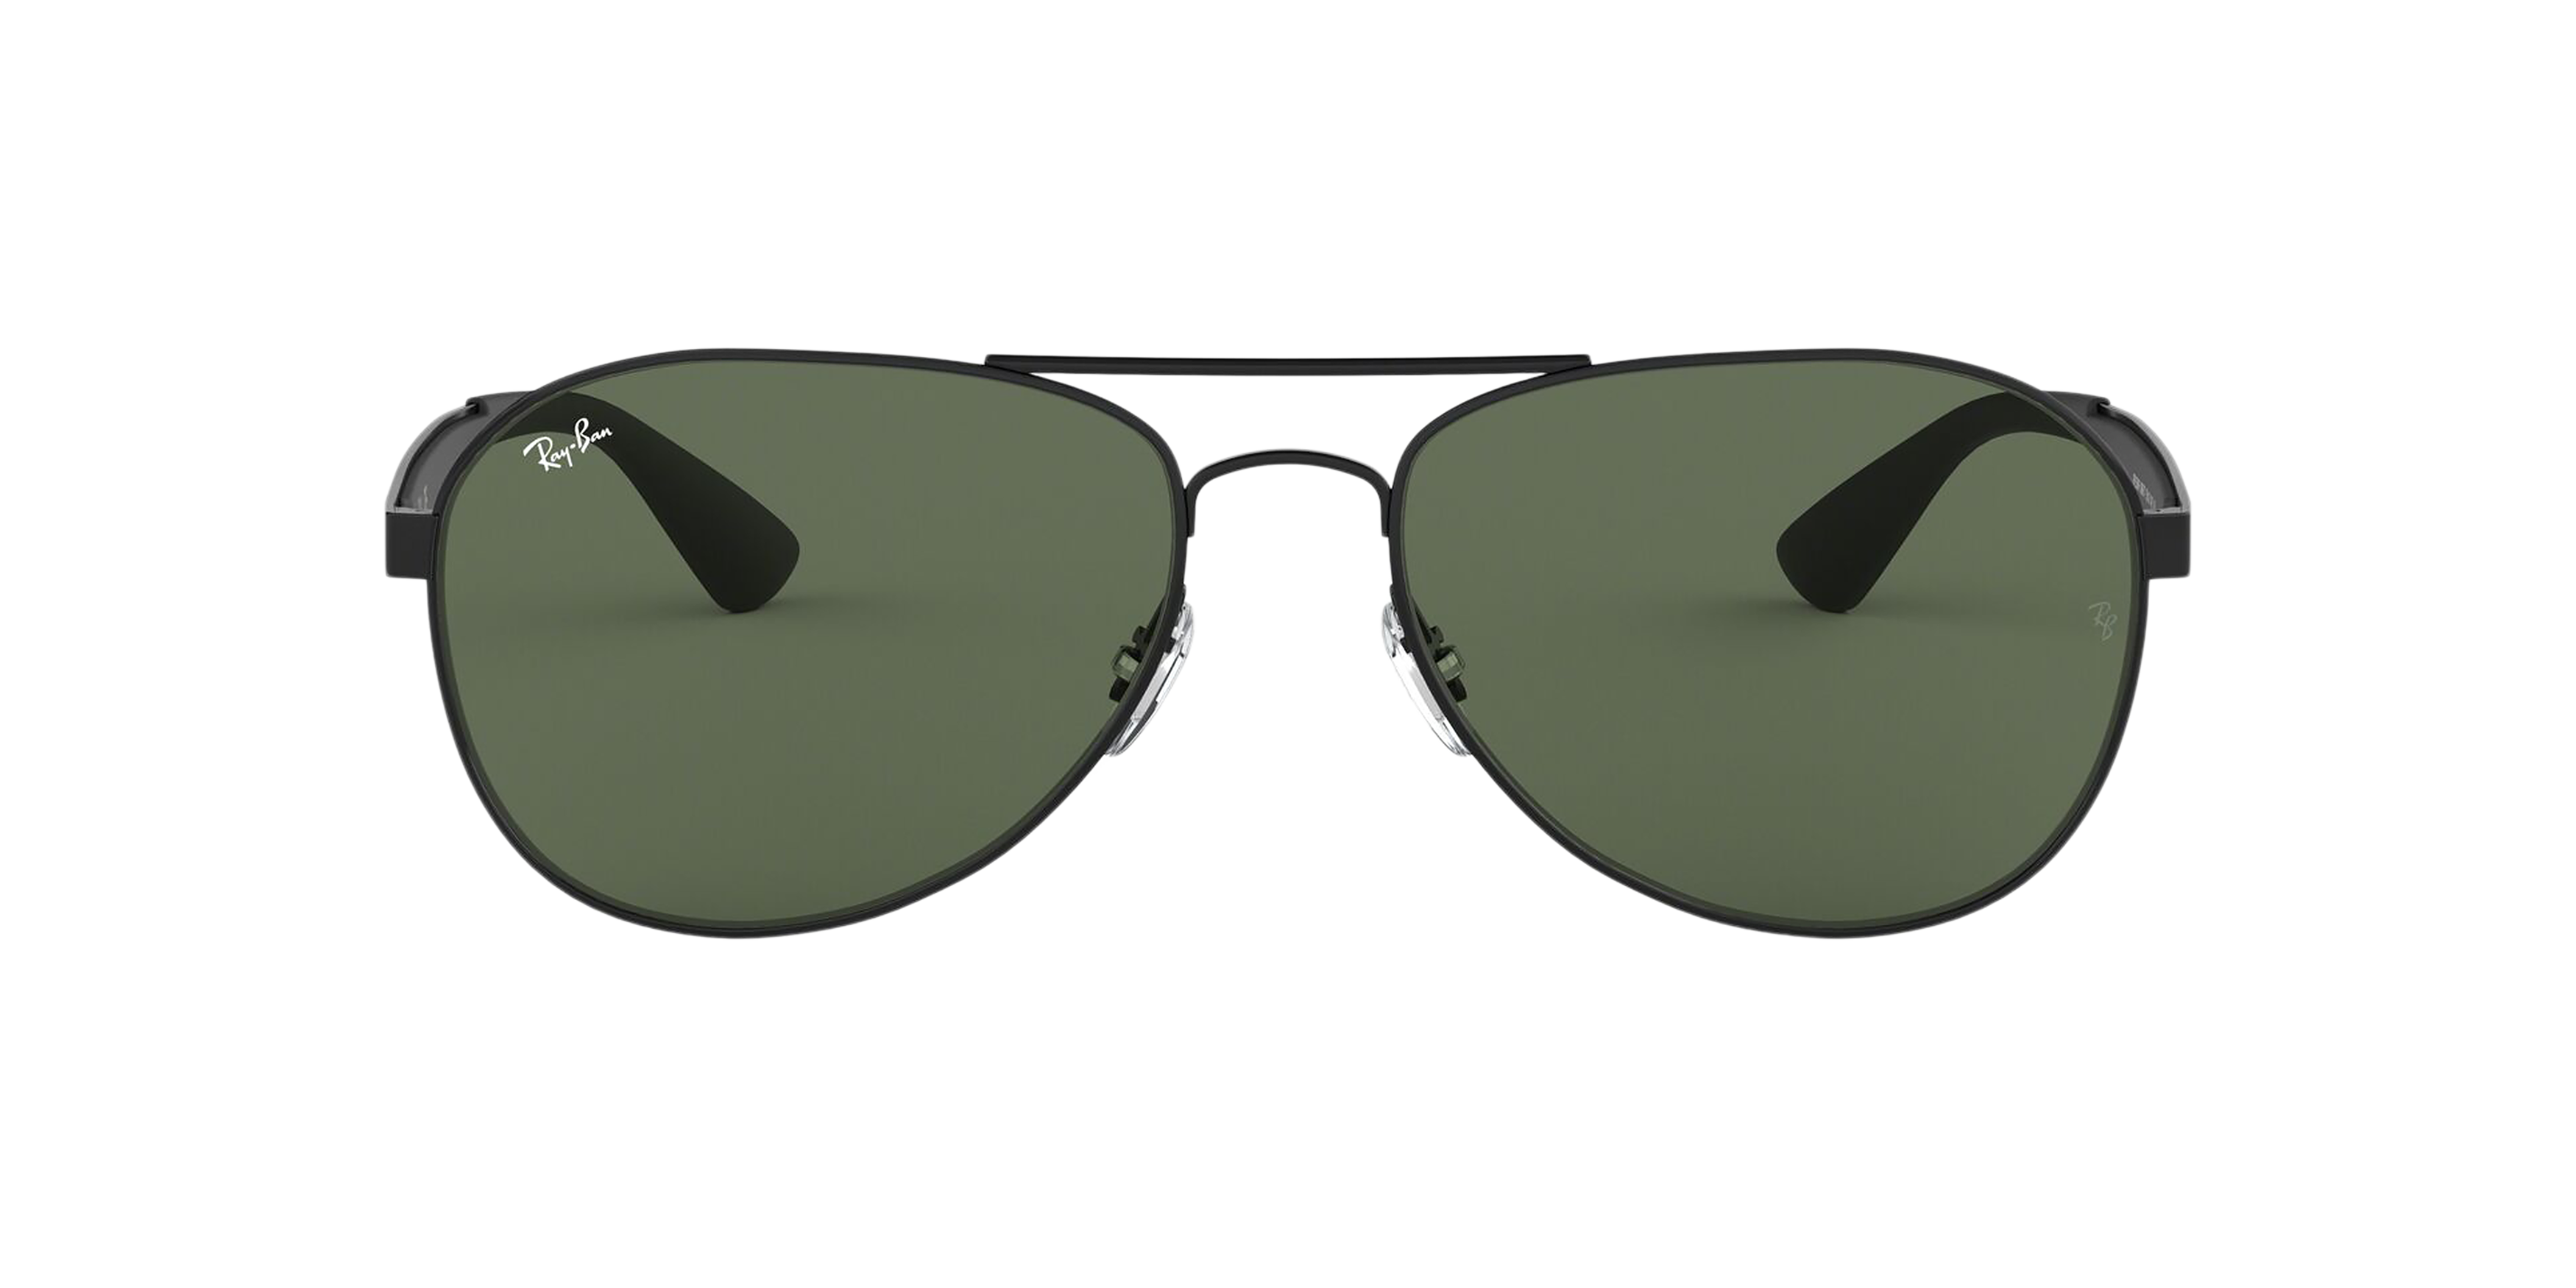 [products.image.front] Ray-Ban RB3549 006/71